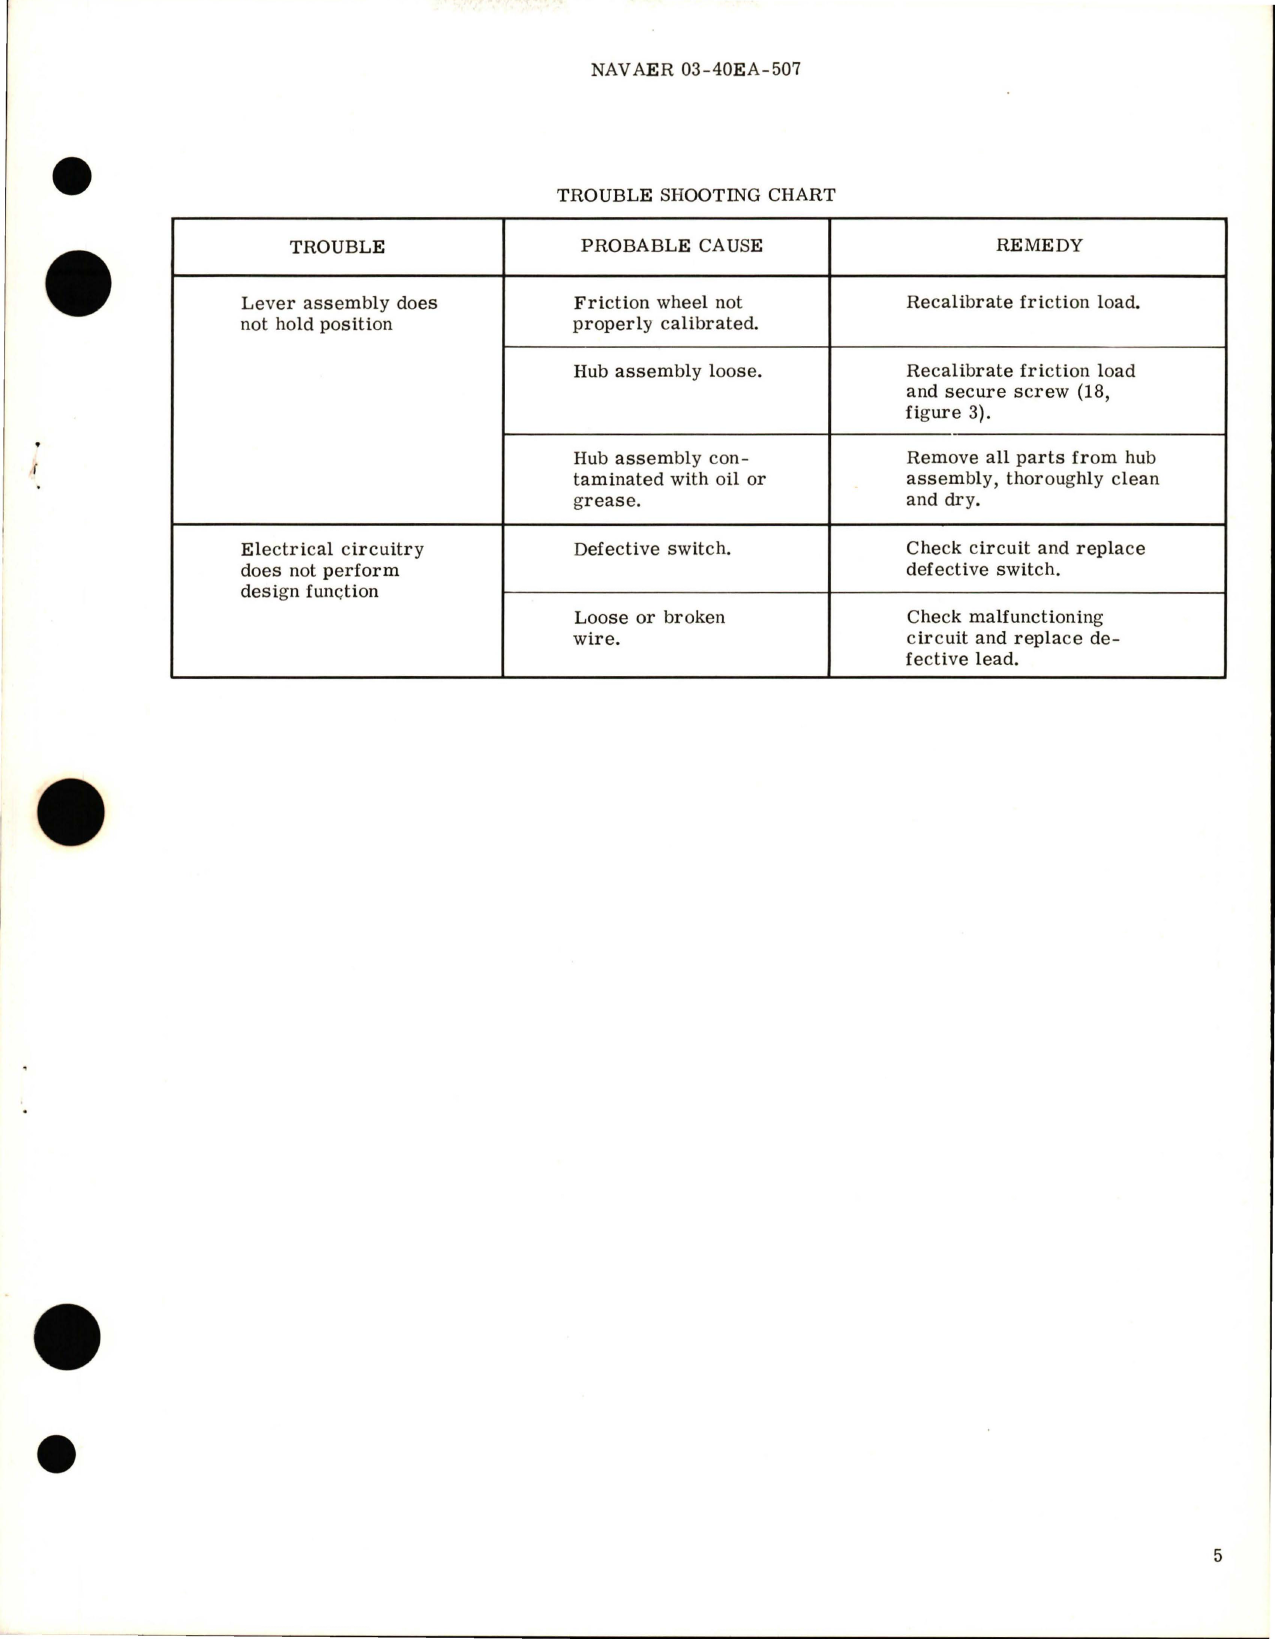 Sample page 5 from AirCorps Library document: Overhaul Instructions with Parts Breakdown for Engine Control Quadrant - Part 5L3294